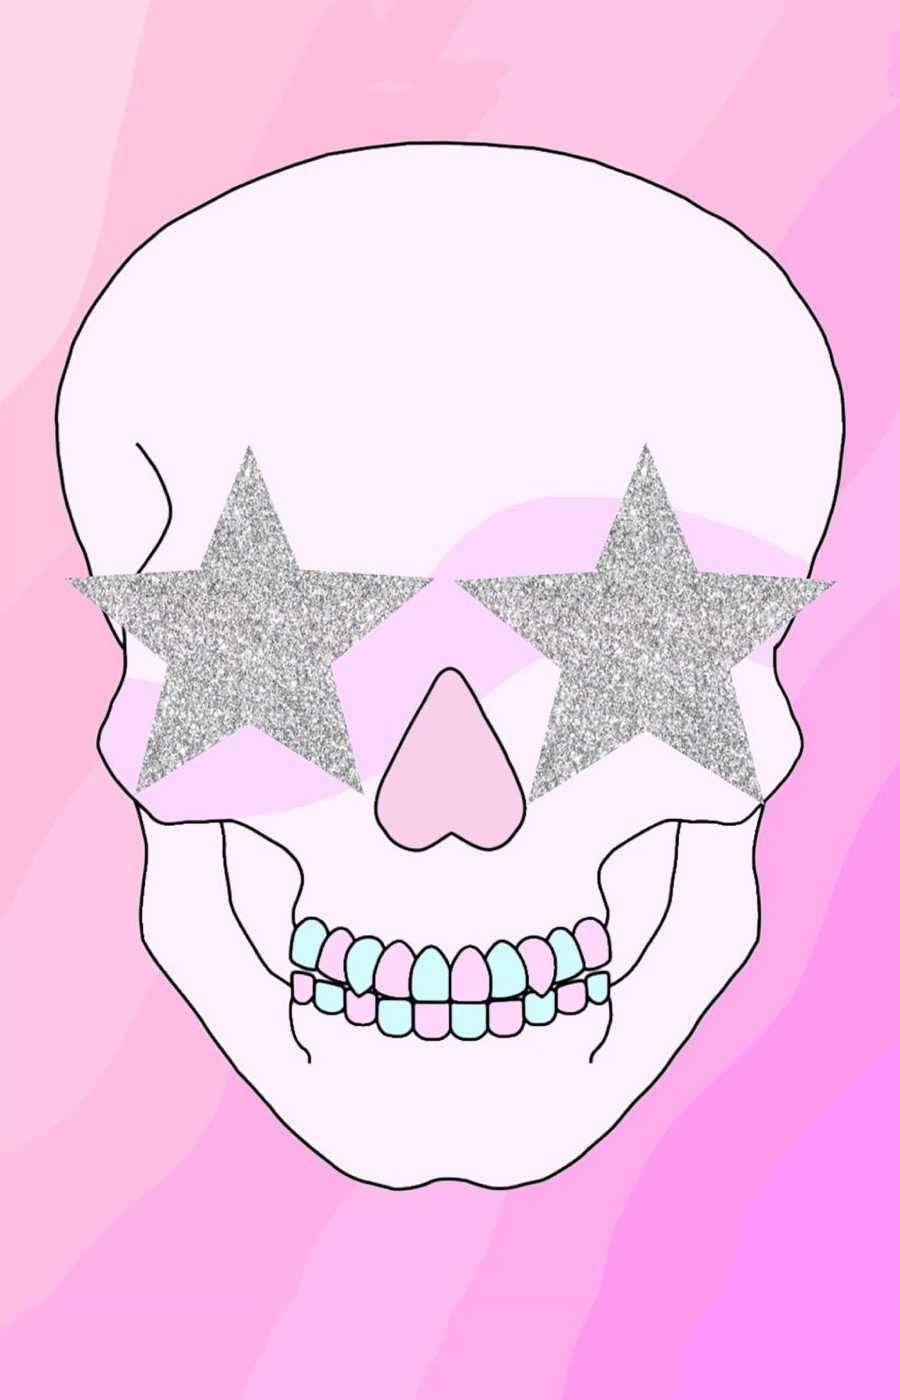 A skull with stars on it - Preppy